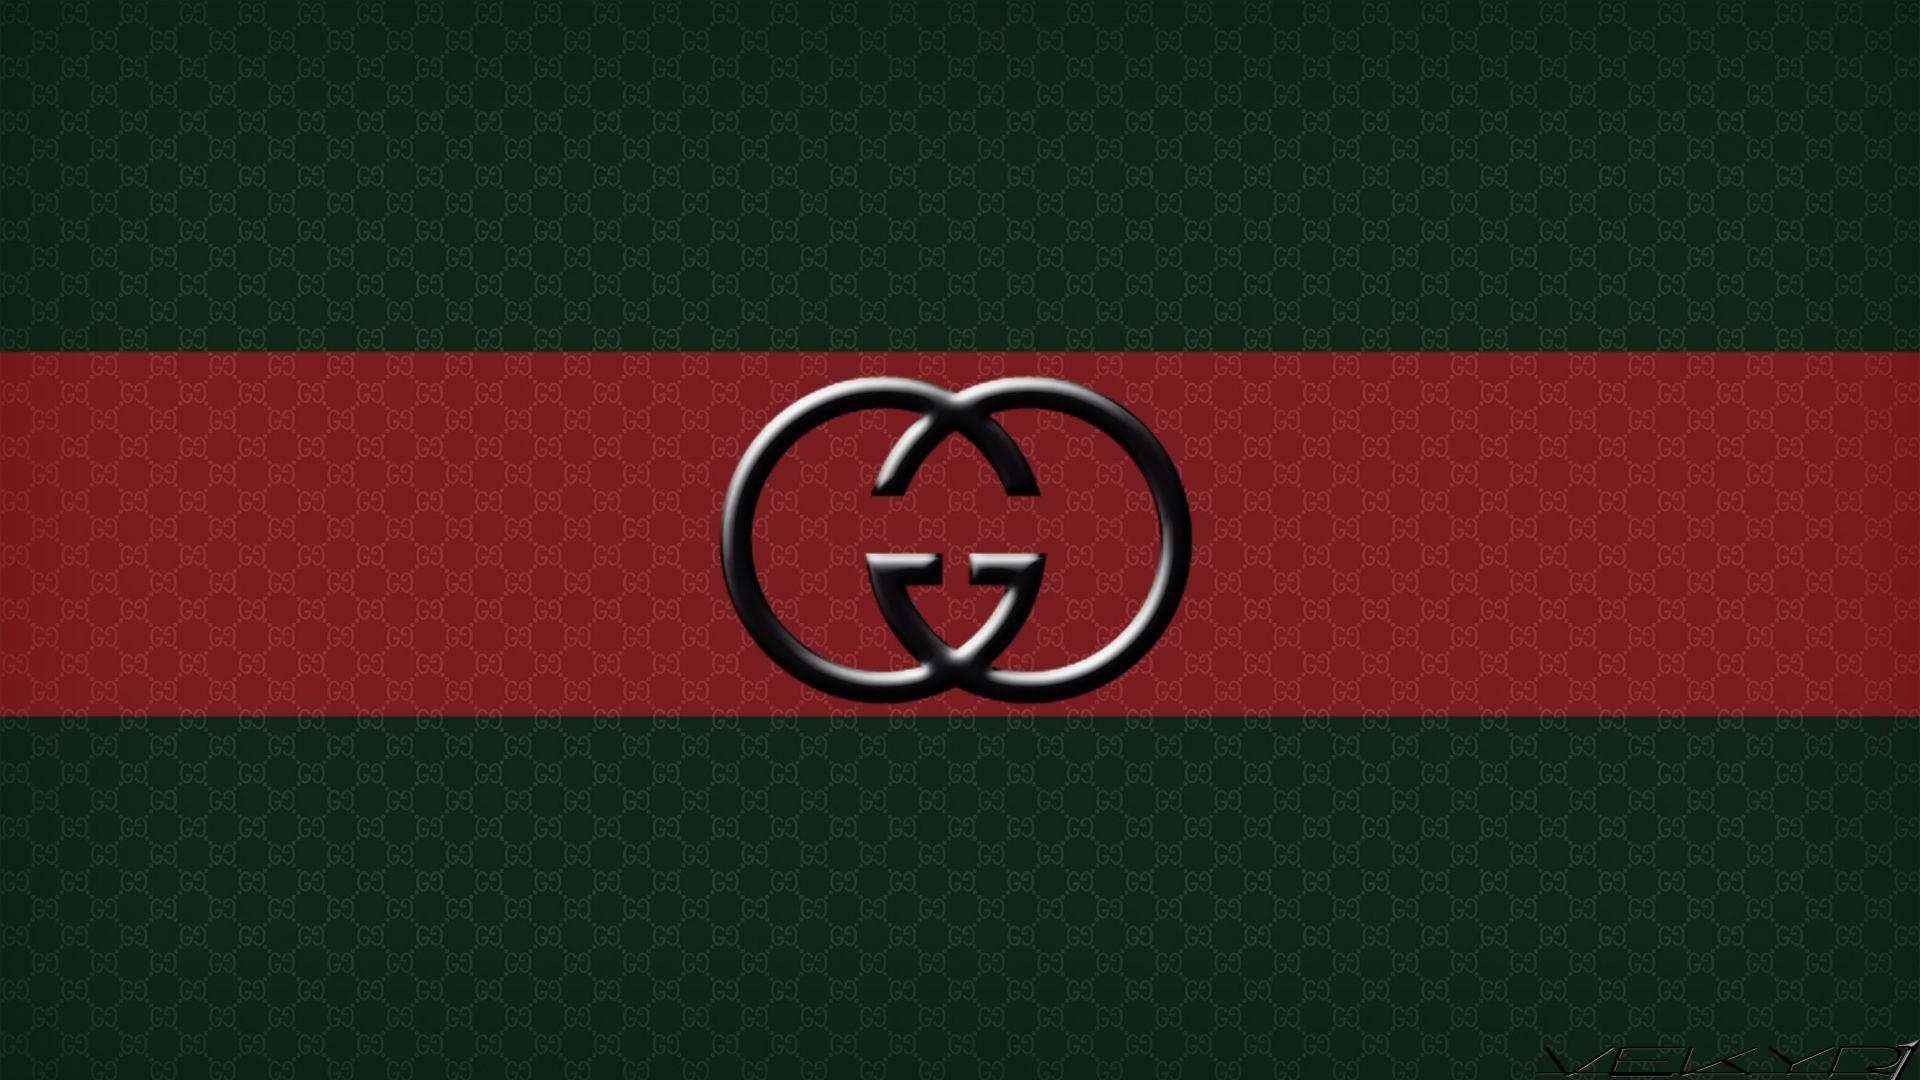 Black Gucci Wallpapers